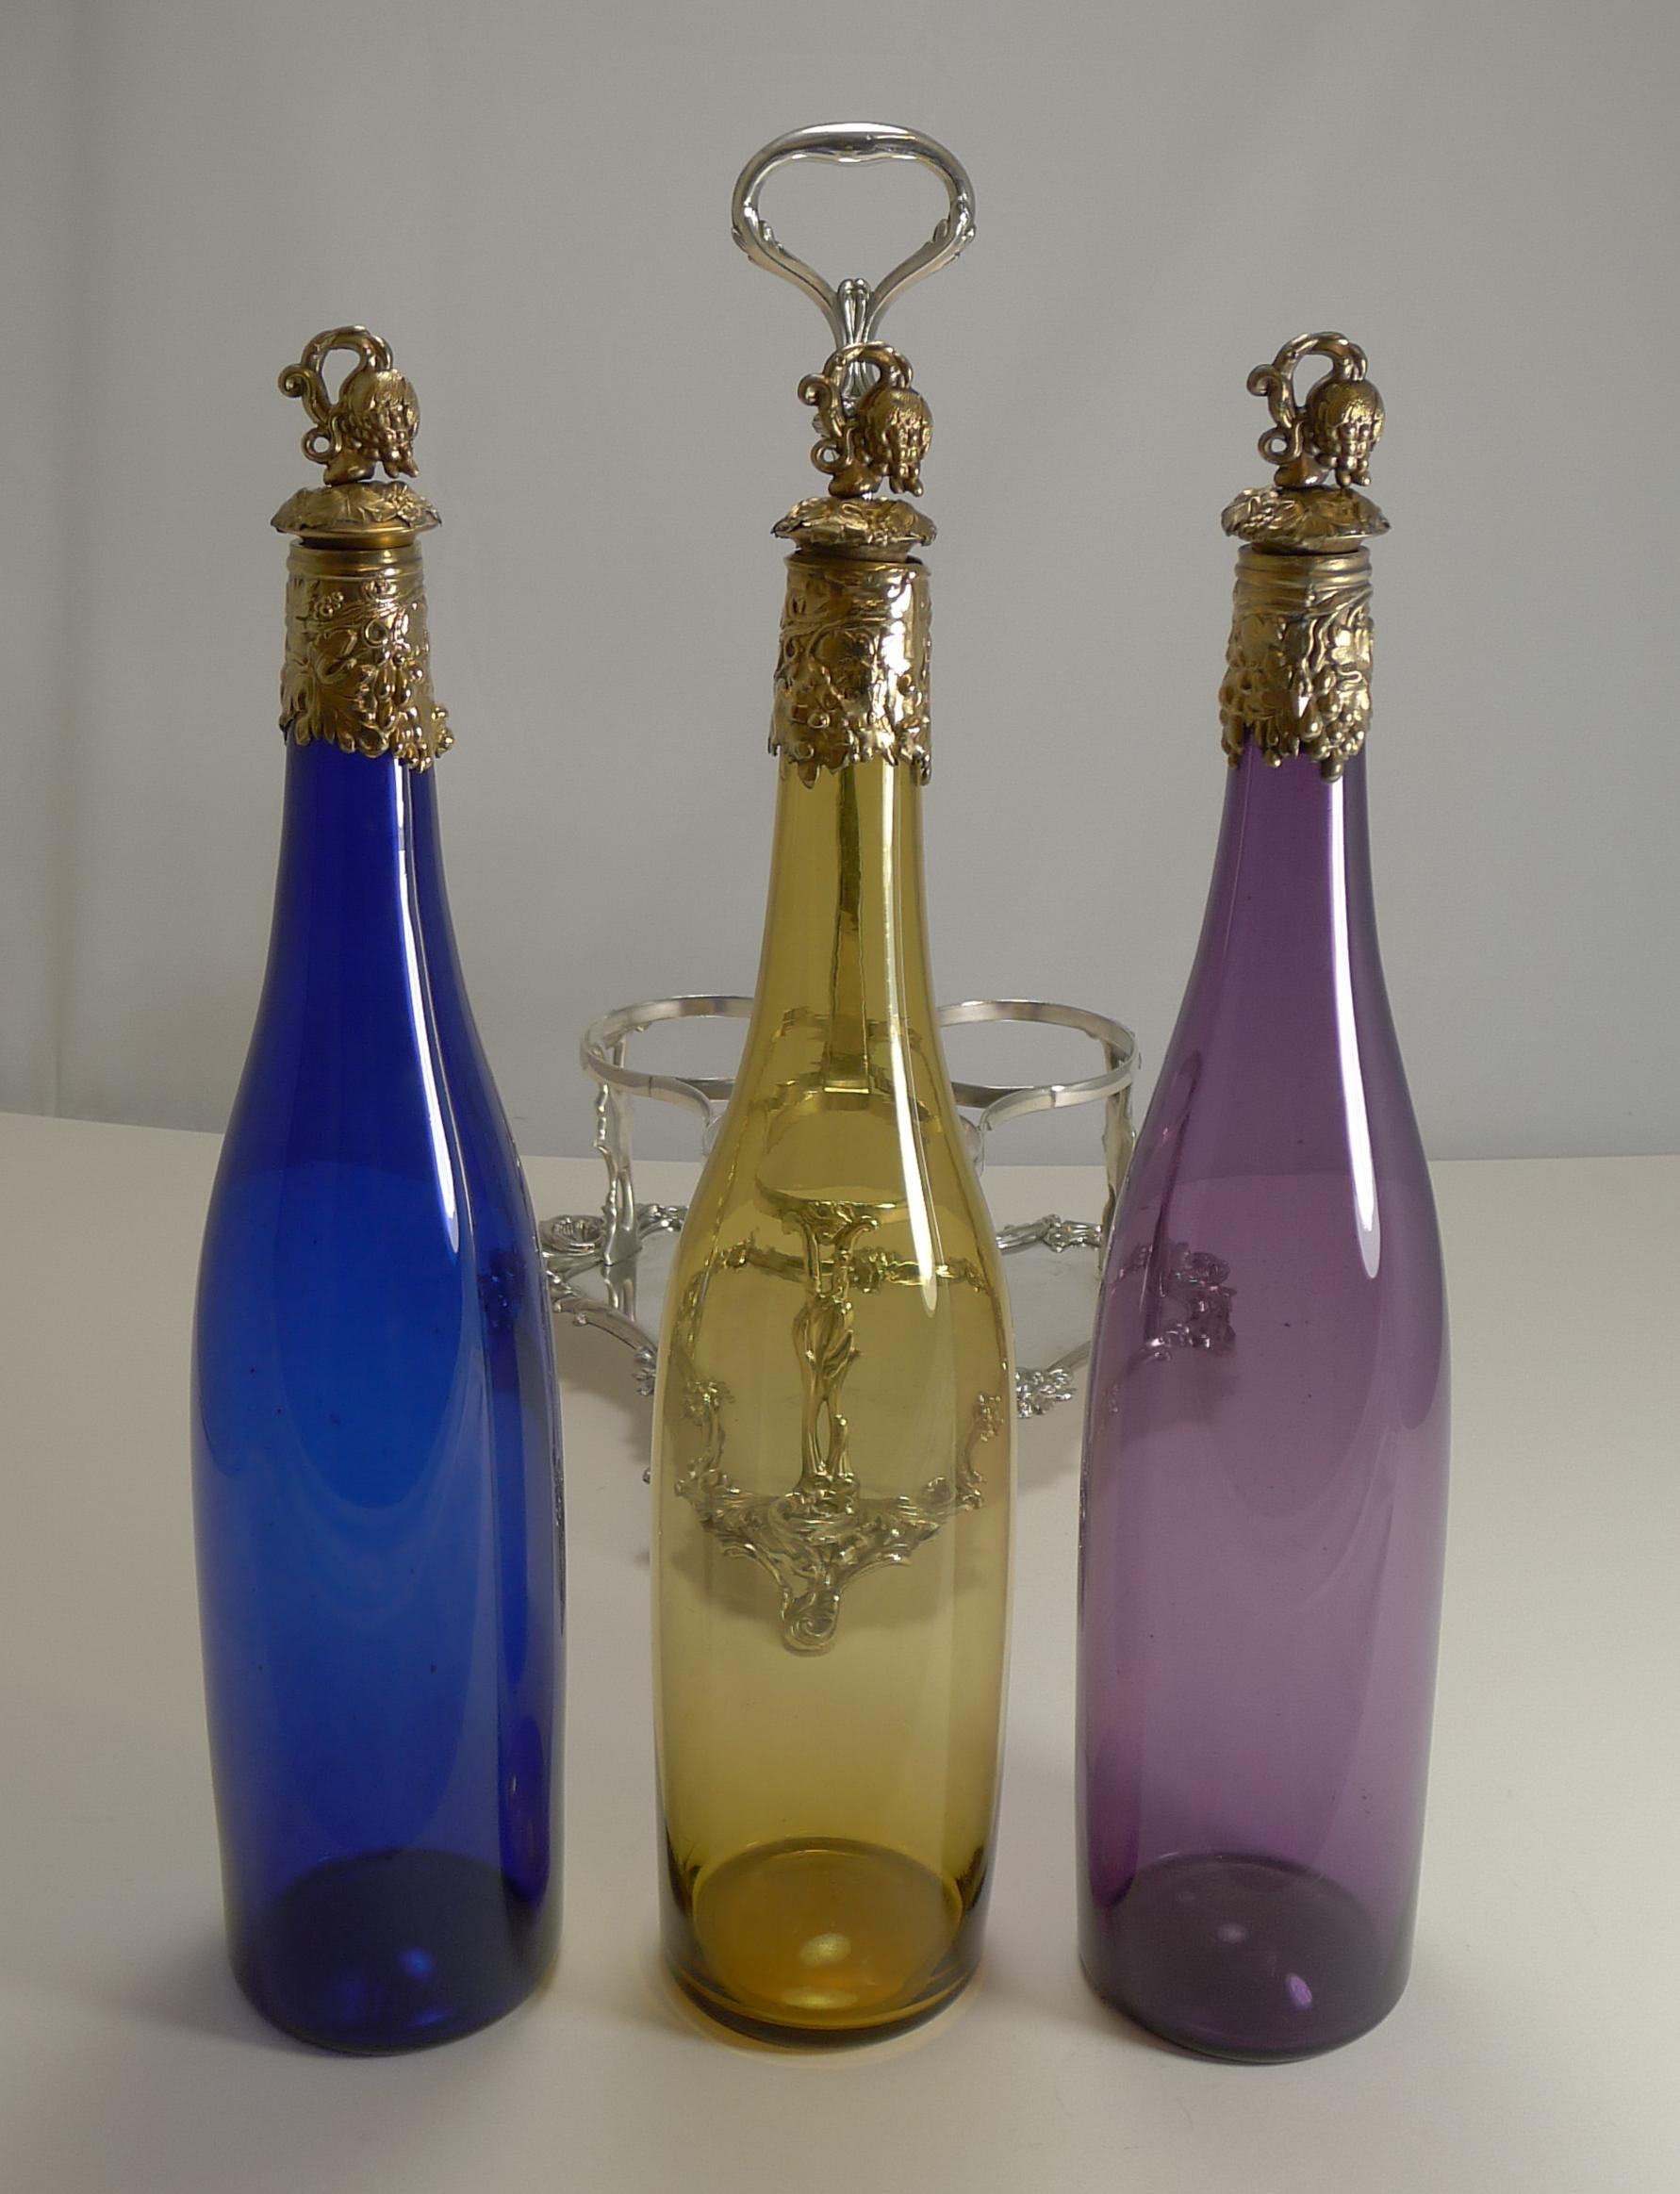 A magnificent set of three late Victorian colored glass decanters, all with polished pontil marks on the underside showing that they were individually hand blown; one in golden yellow, one in Amethyst and one in cobalt blue.

Each is topped with a